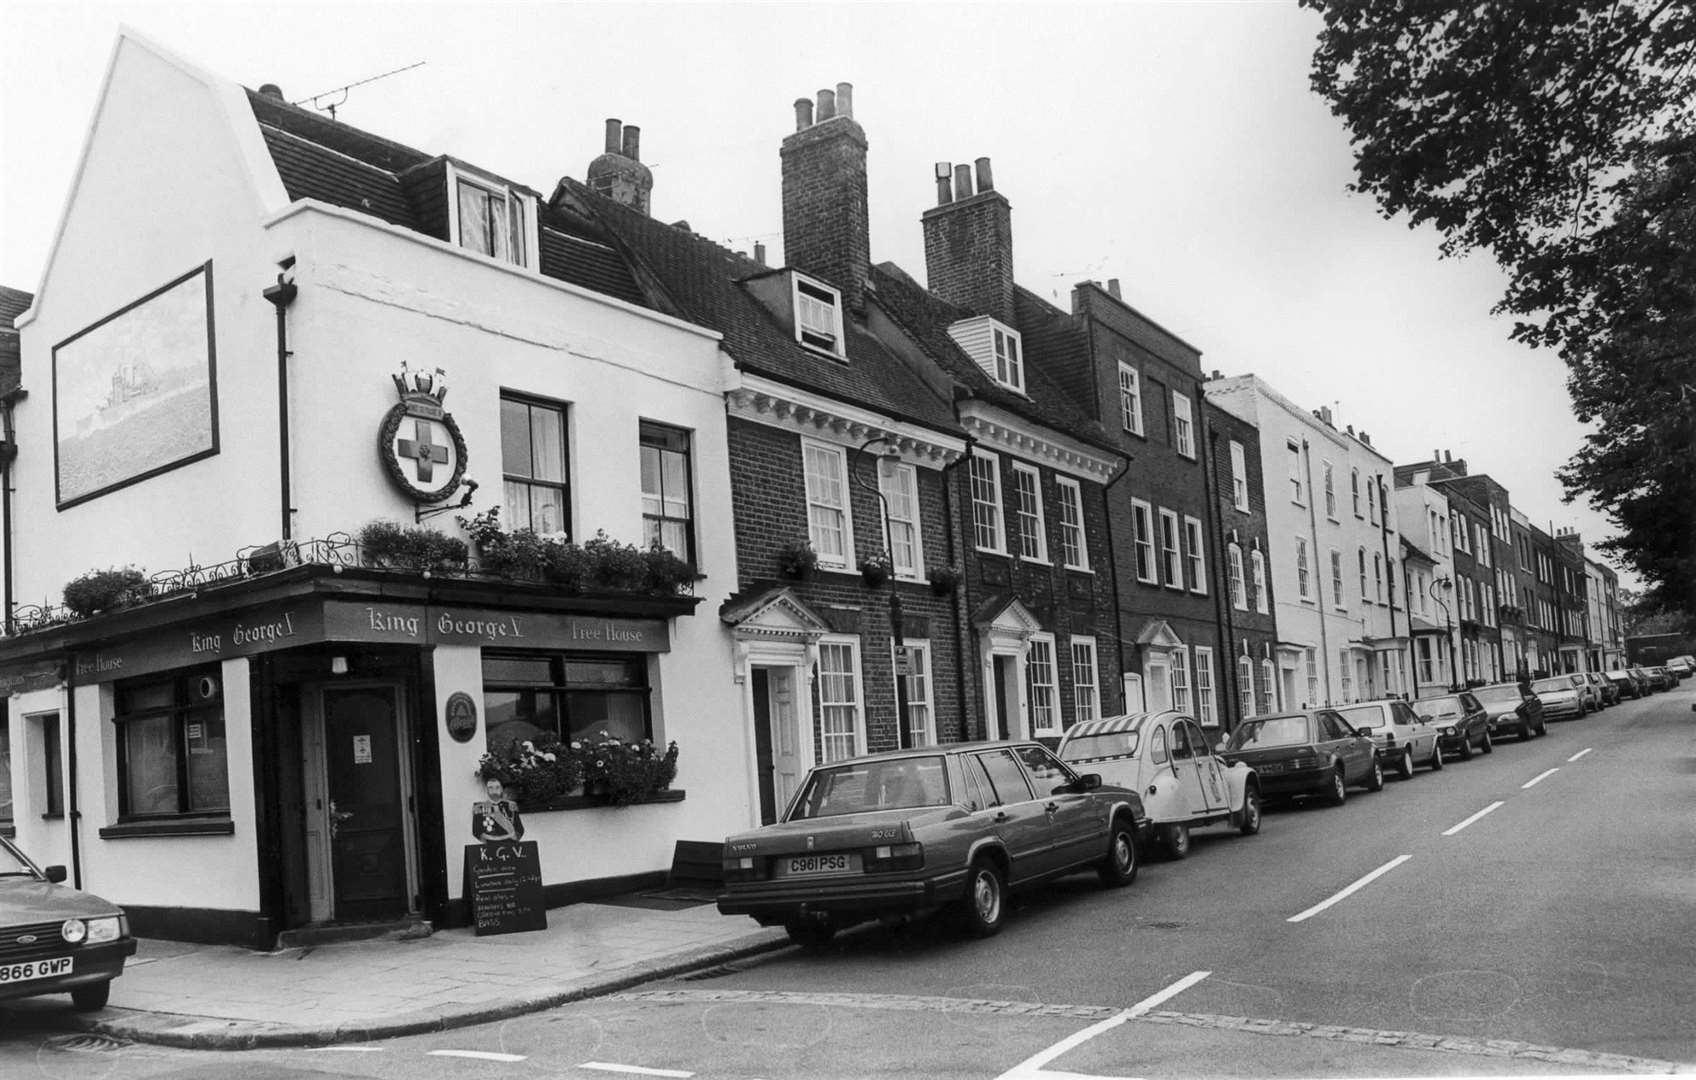 The King George V and a view of Prospect Row in 1990. Both Lord Nelson and General Kitchener once lived in the street